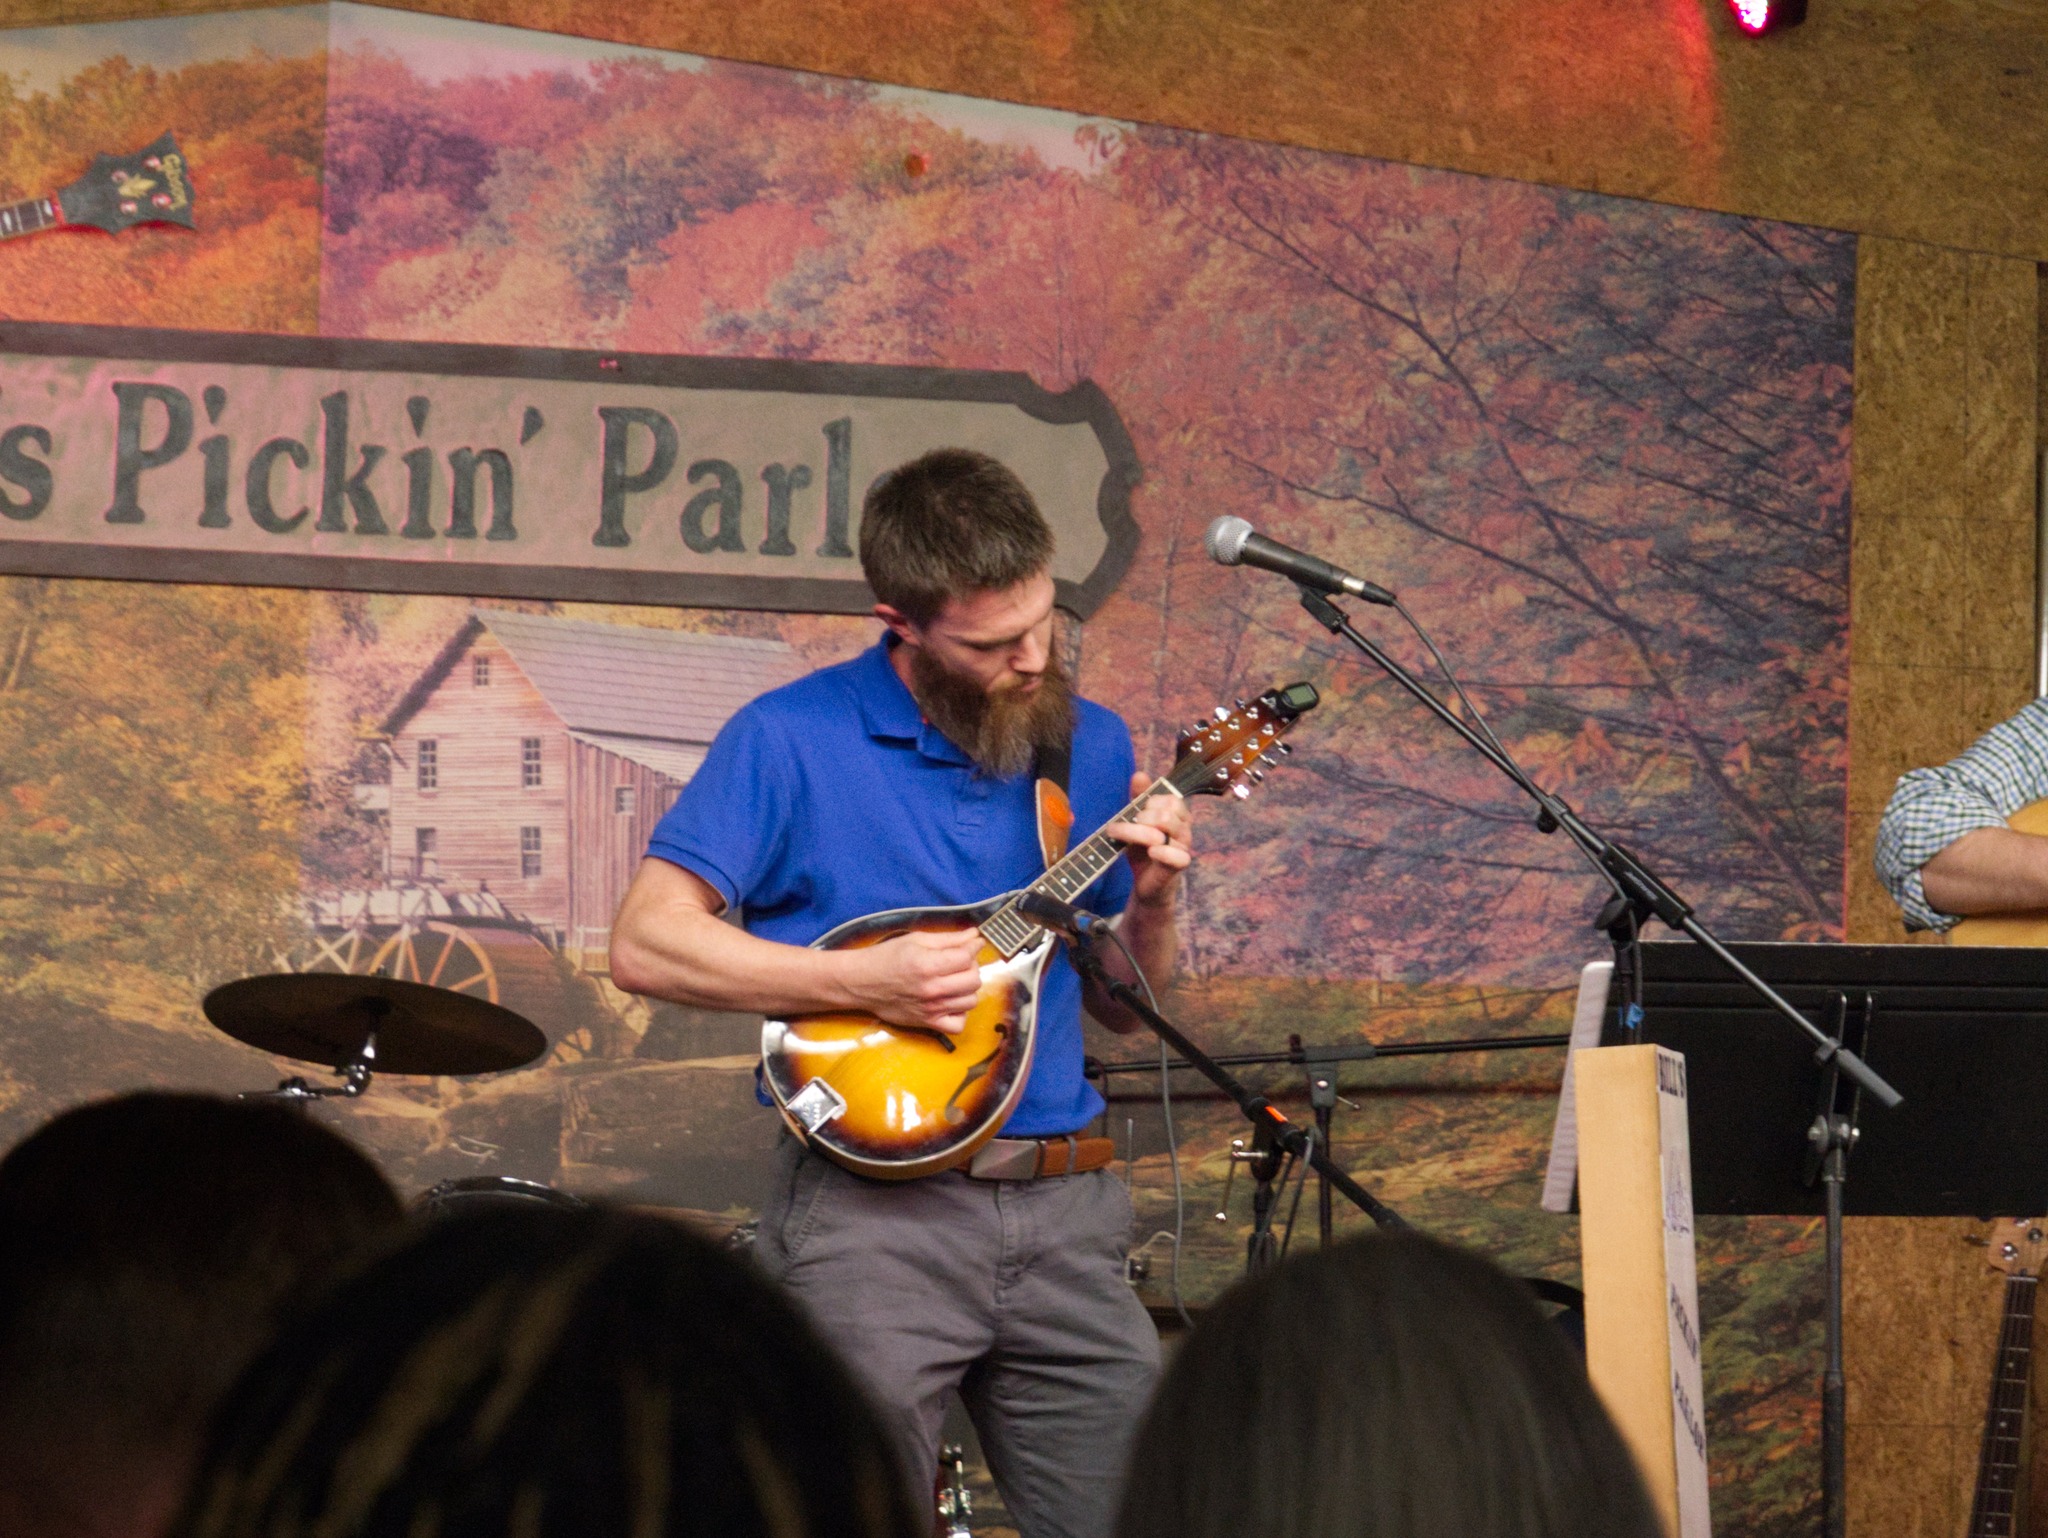 Jim performing with a mandolin student